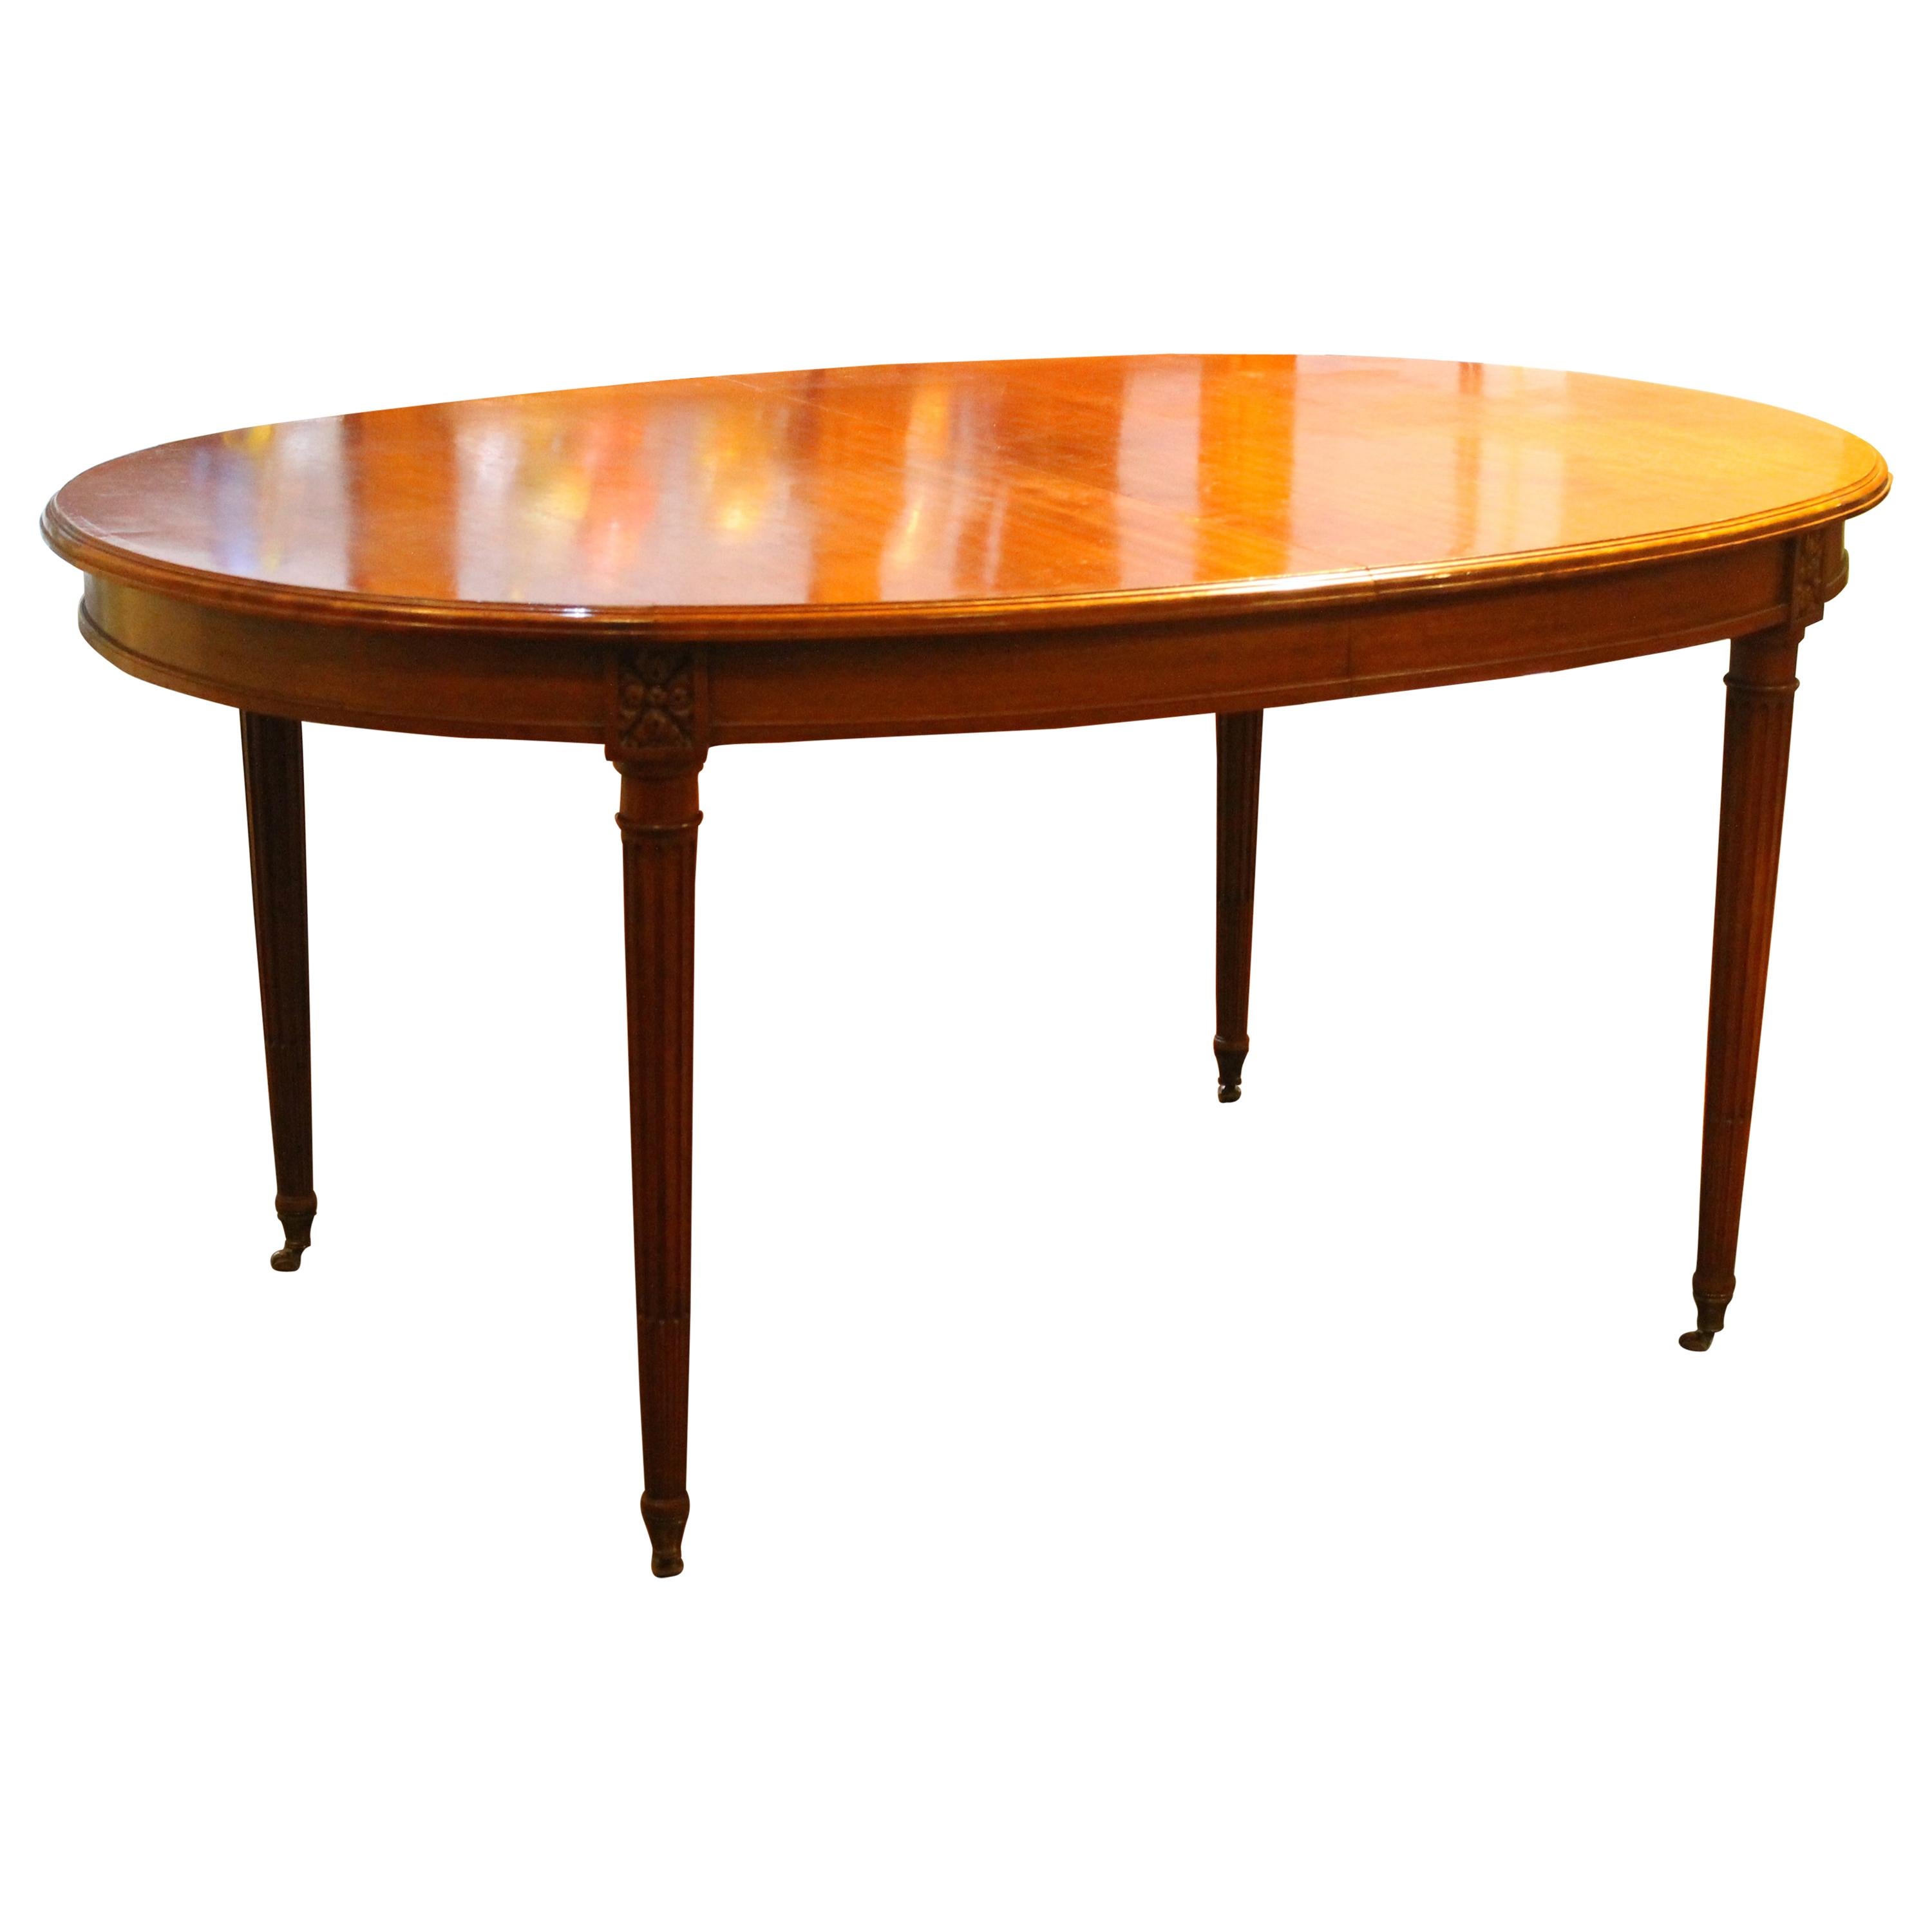 French Louis XVI Style Oval Extending Dining Mahogany Table with Wheel Feet